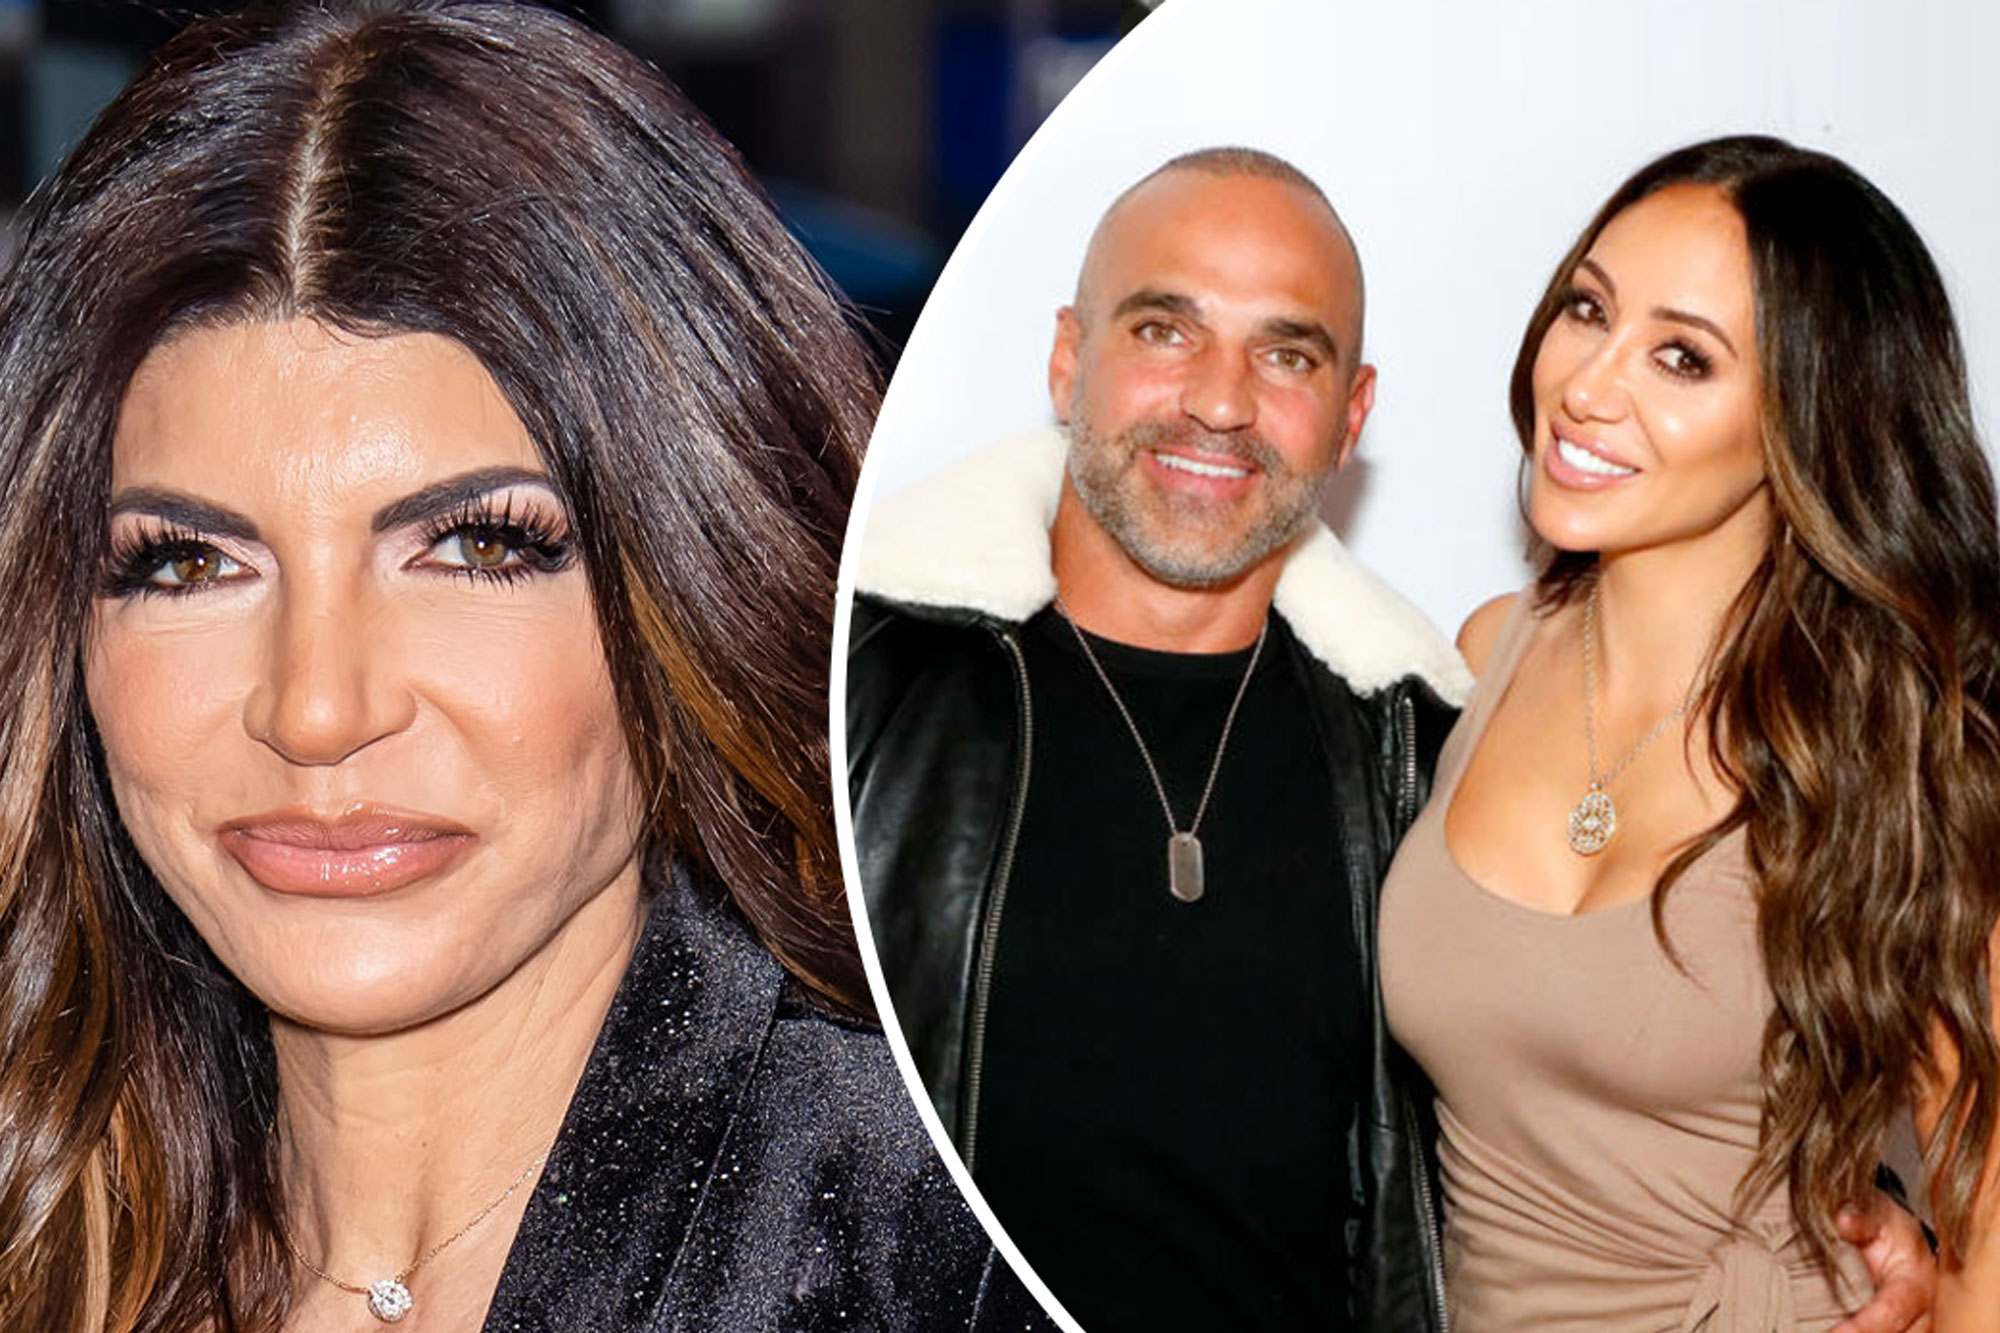 The 5 moments from the ‘RHONJ’ reunion we can’t stop talking about